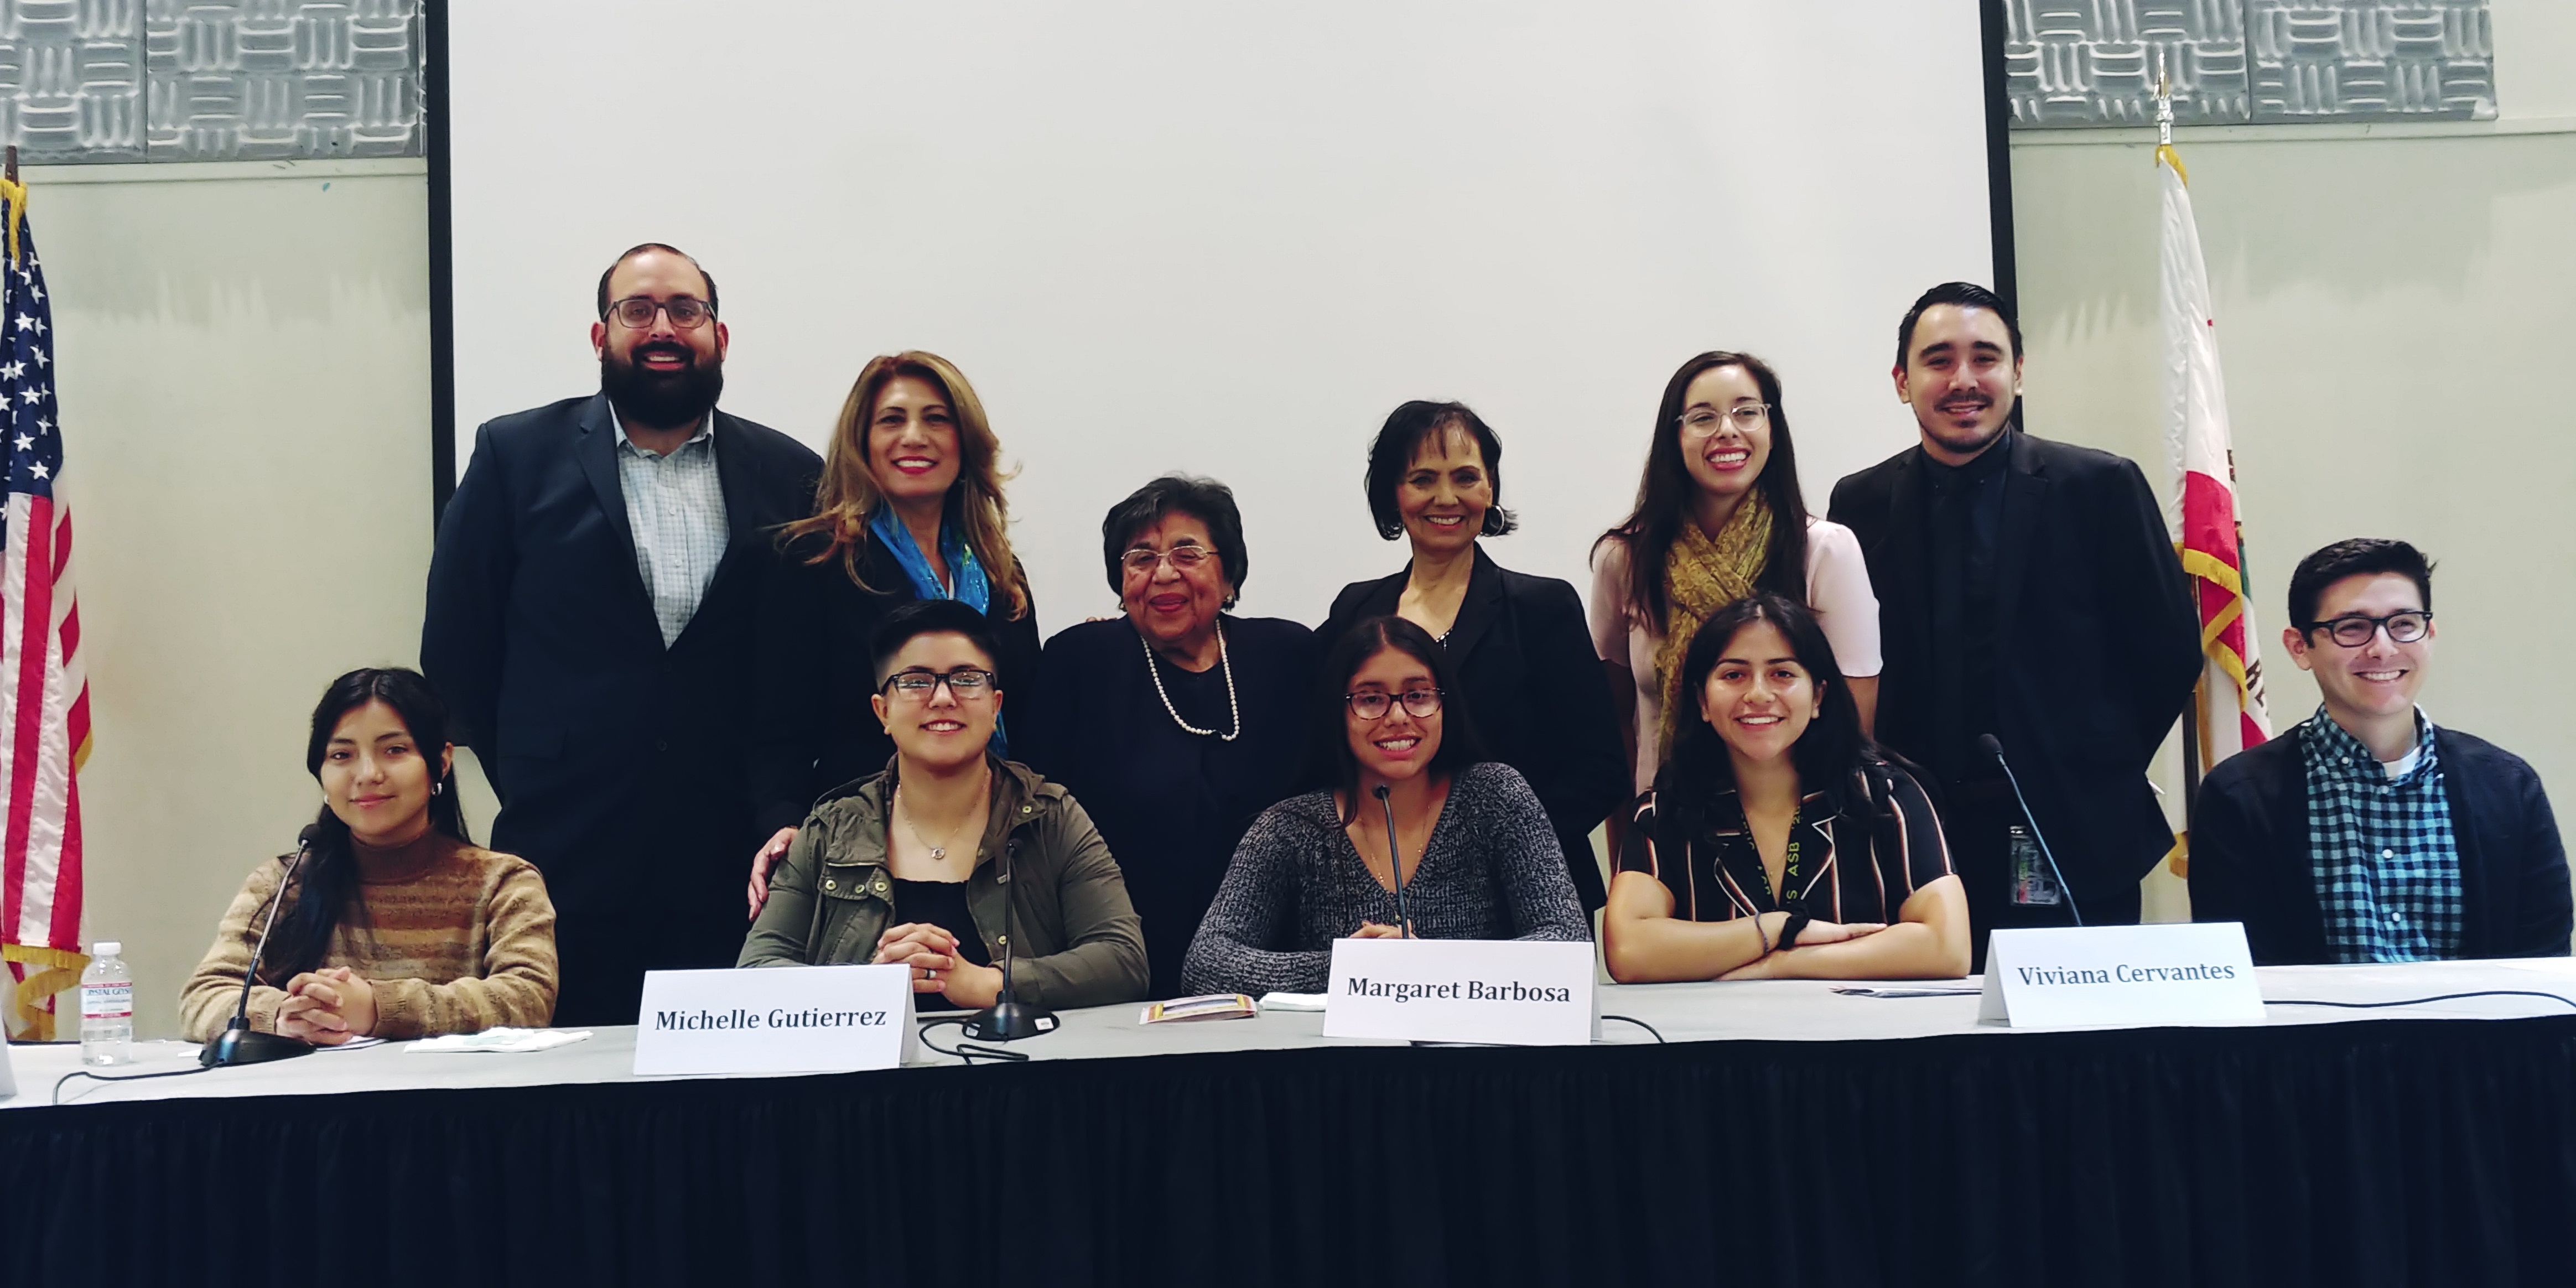 Group shot of LA HRC 'Light in the Darkness' community screening and student panelists at LA Mission College on Sept. 28, 2019.